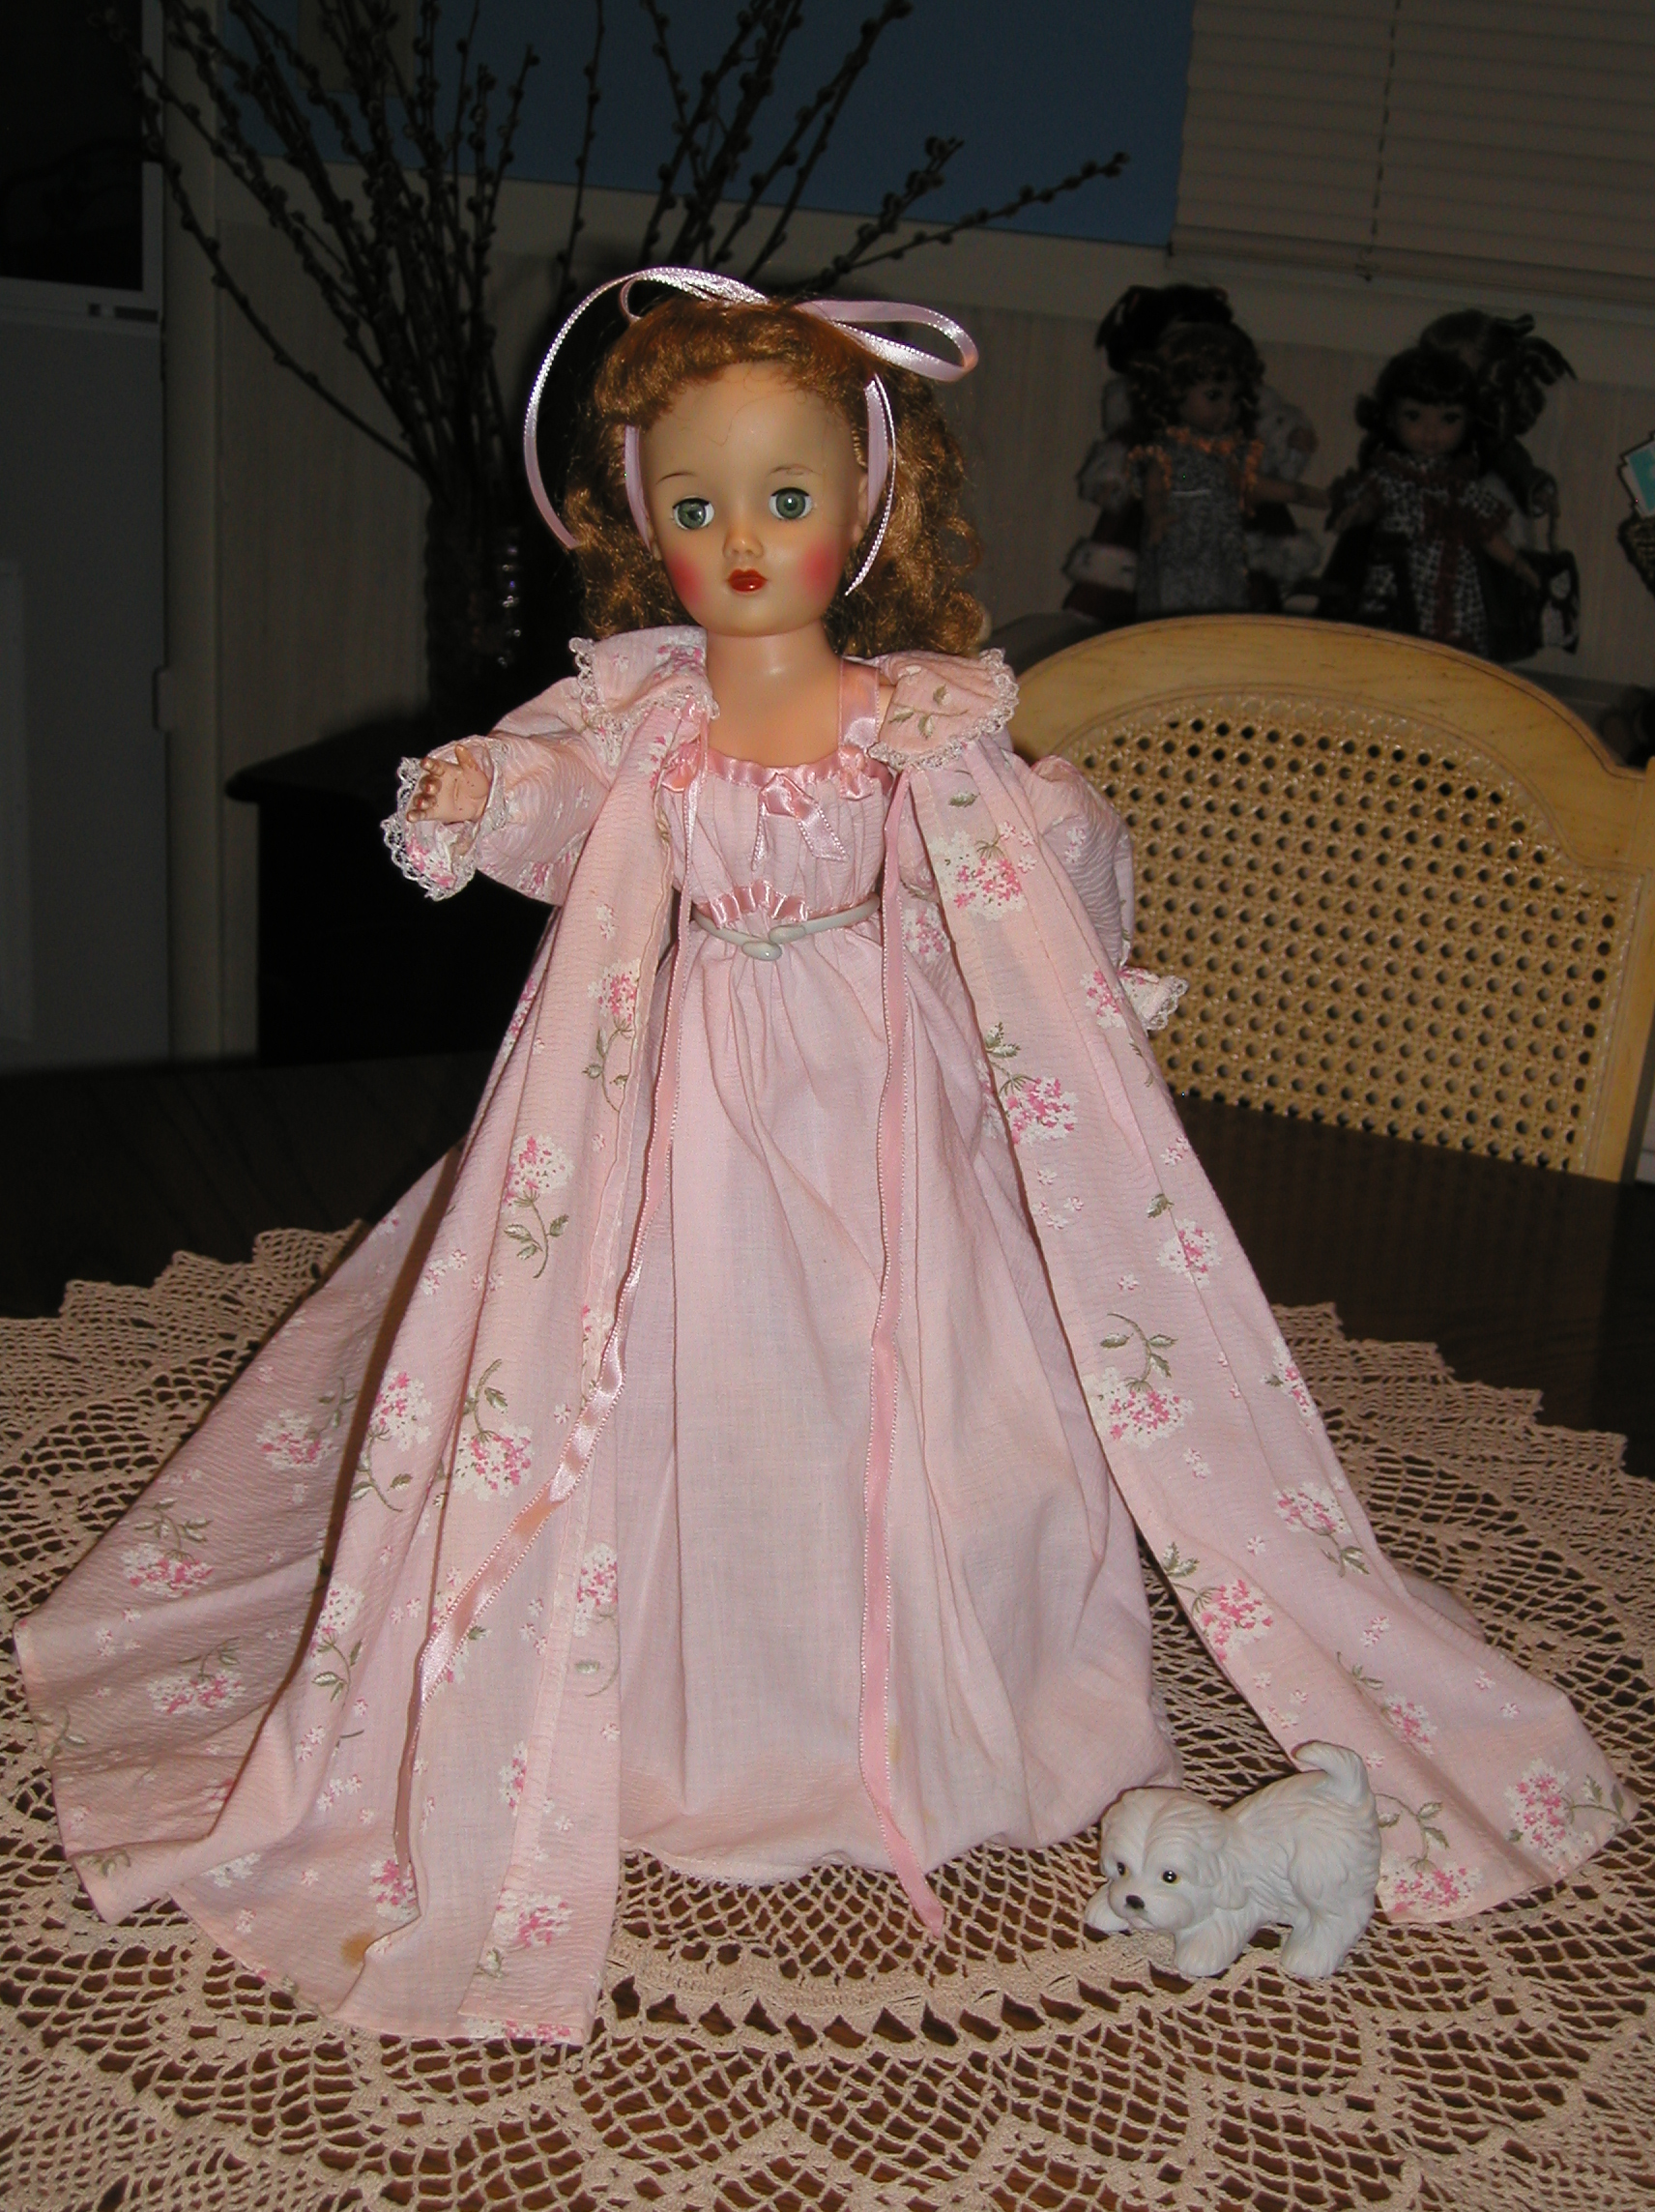 Thrift Store Doll